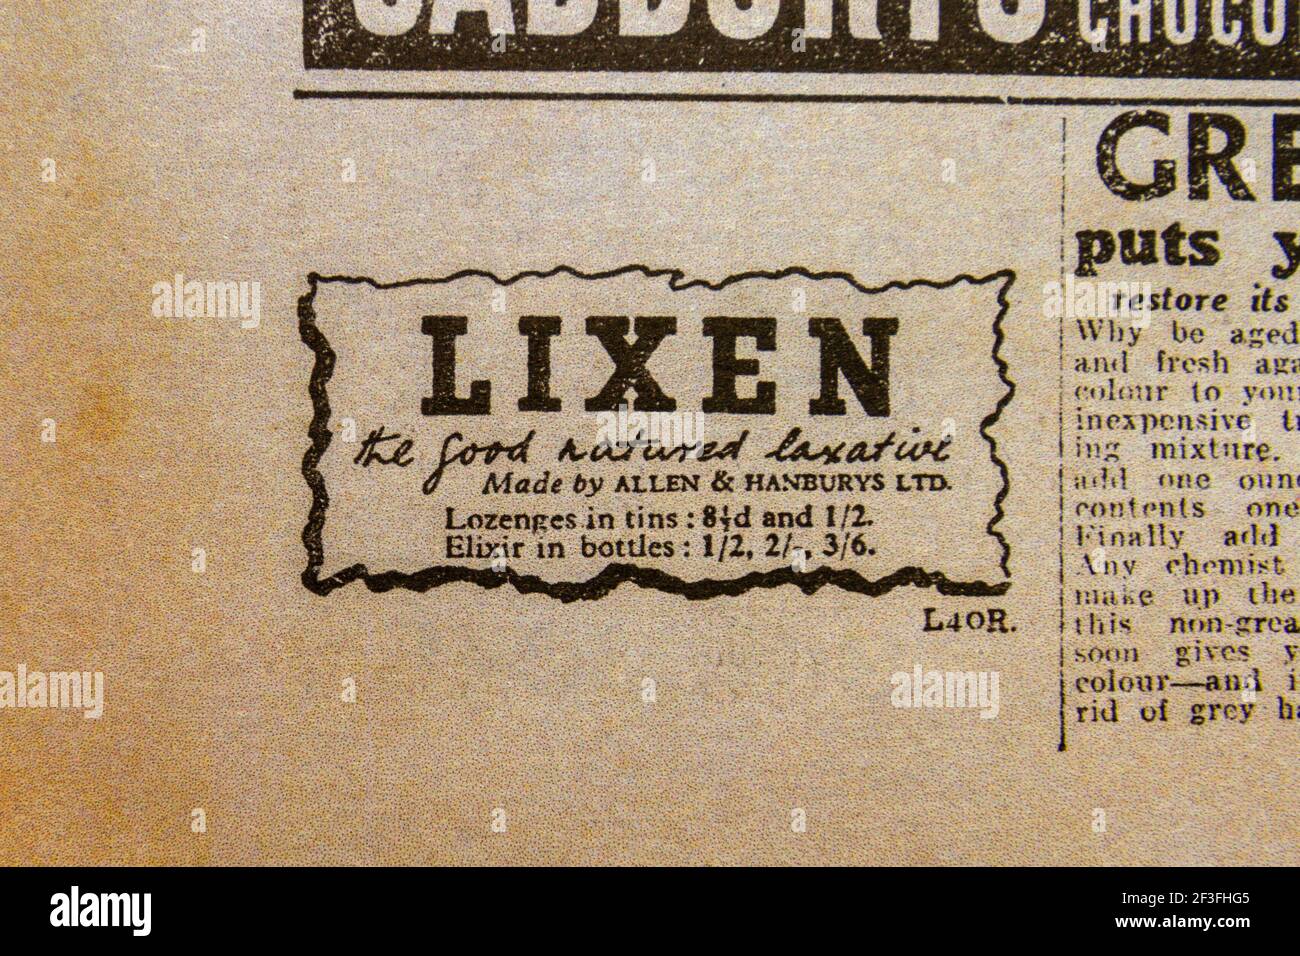 Advert for Lixen 'food natured laxative' in the Daily Sketch newspaper (replica), 29th August 1940 (during the Blitz). Stock Photo